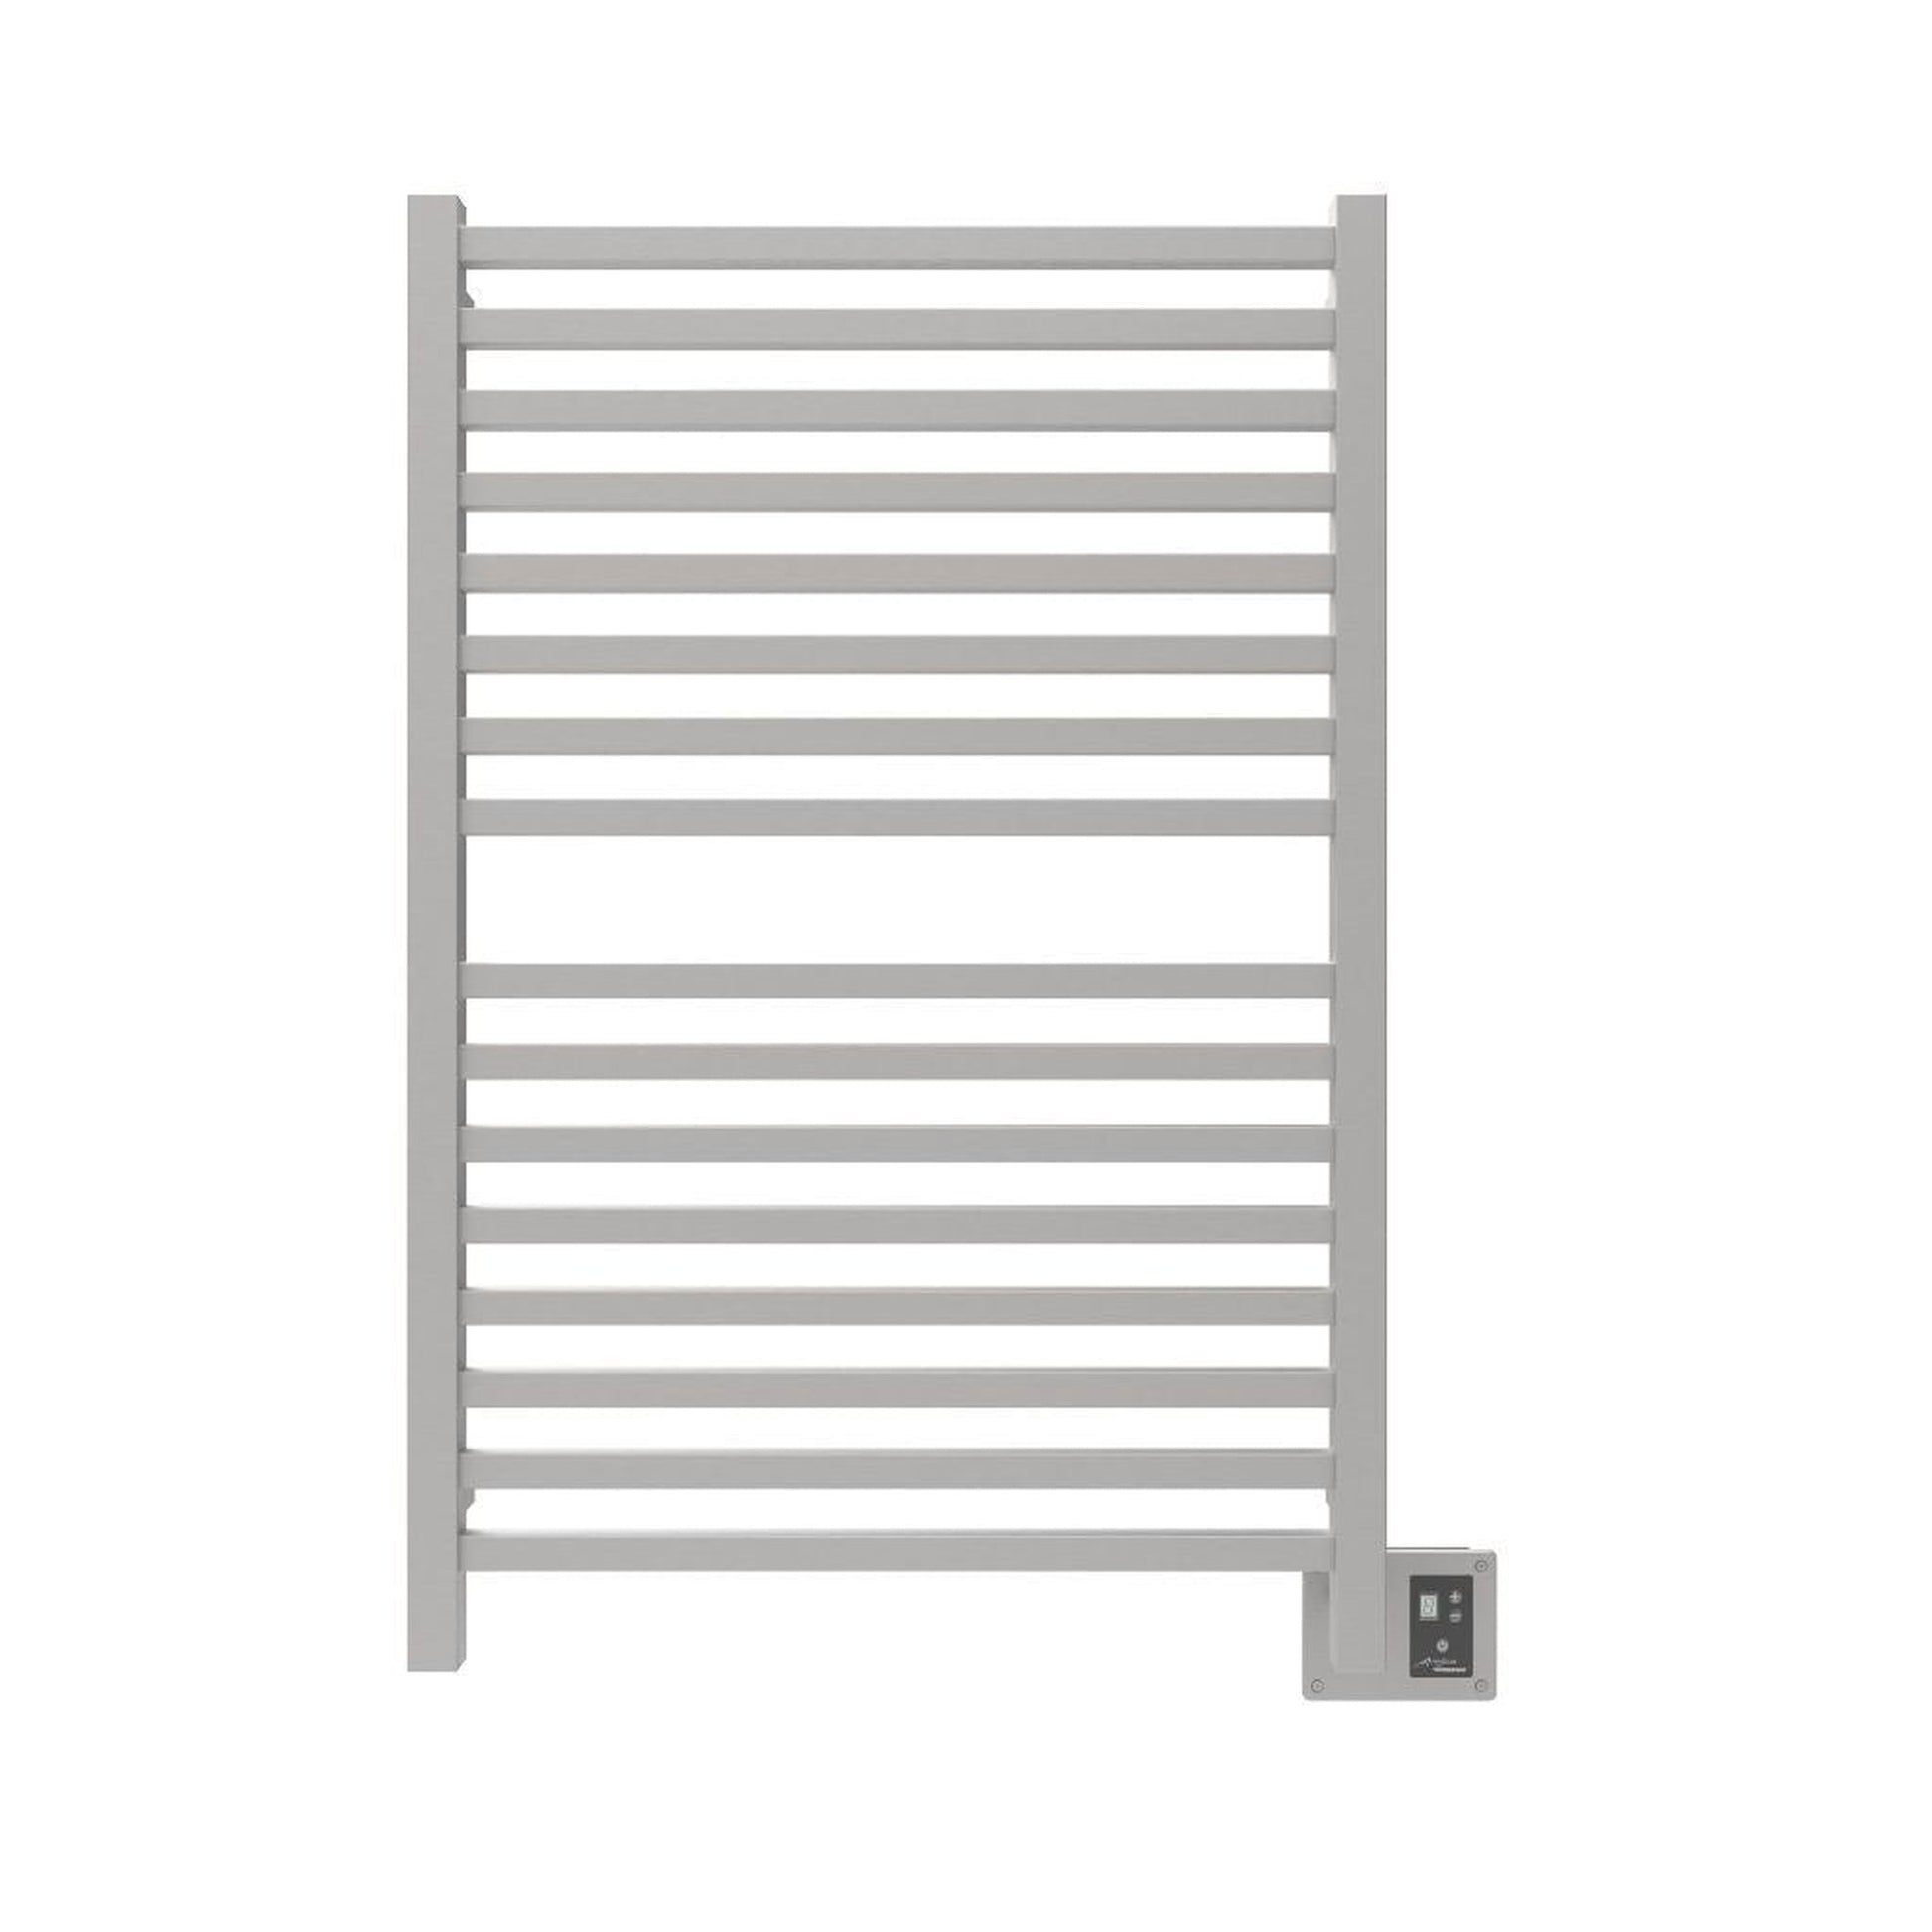 Amba Quadro 28" x 42" 16-Bar Brushed Stainless Steel Hardwired Towel Warmer With Digital Heat Controller